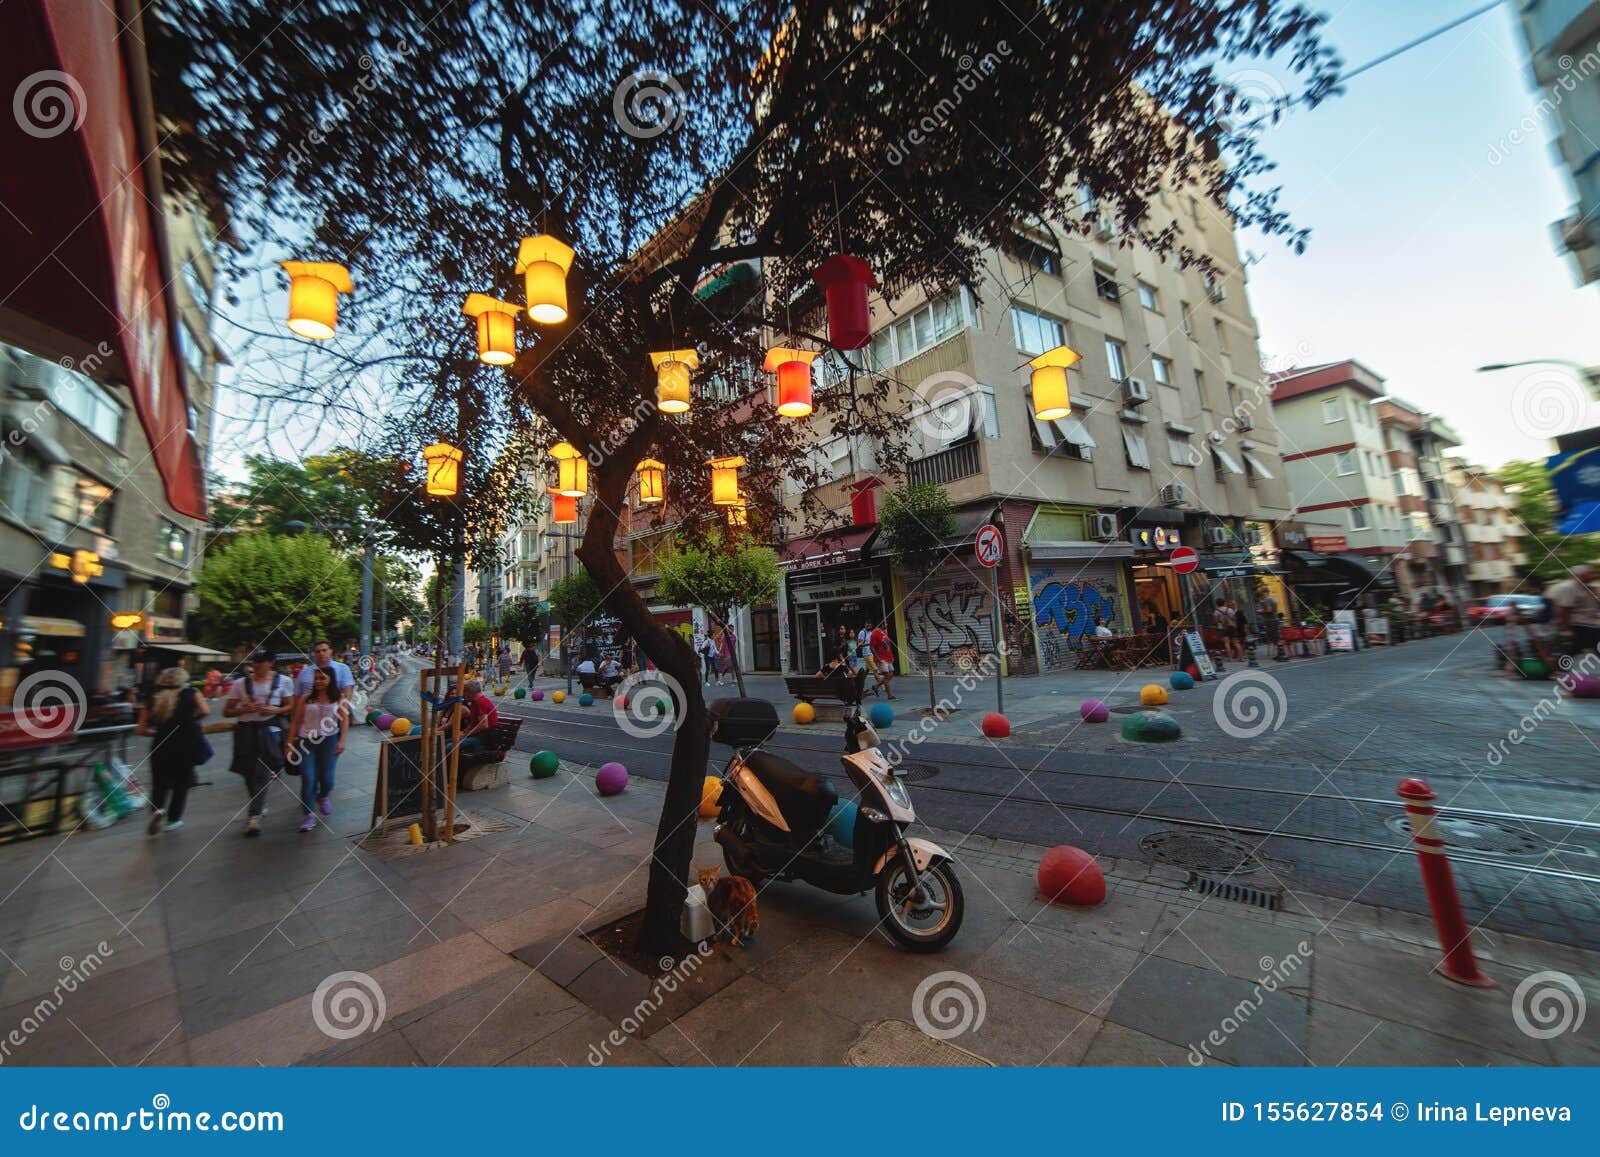 Kadikoy - Moda District and One Most Popular at Asian Side of Editorial Stock Image - Image of nostalgic, colourful: 155627854